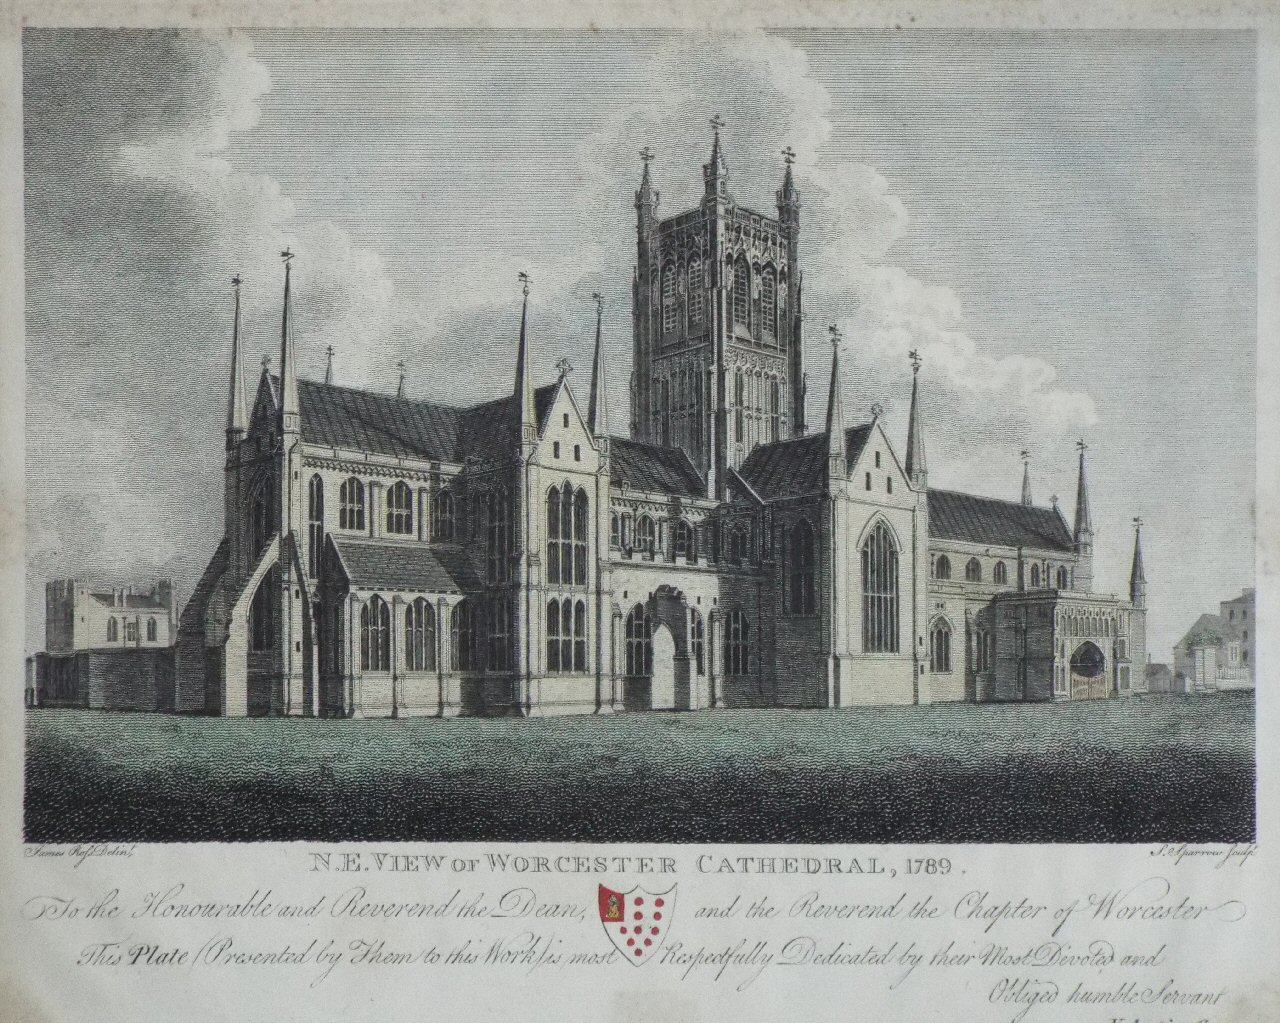 Print - N.E. View of Worcester Cathedral, 1789 - Sparrow